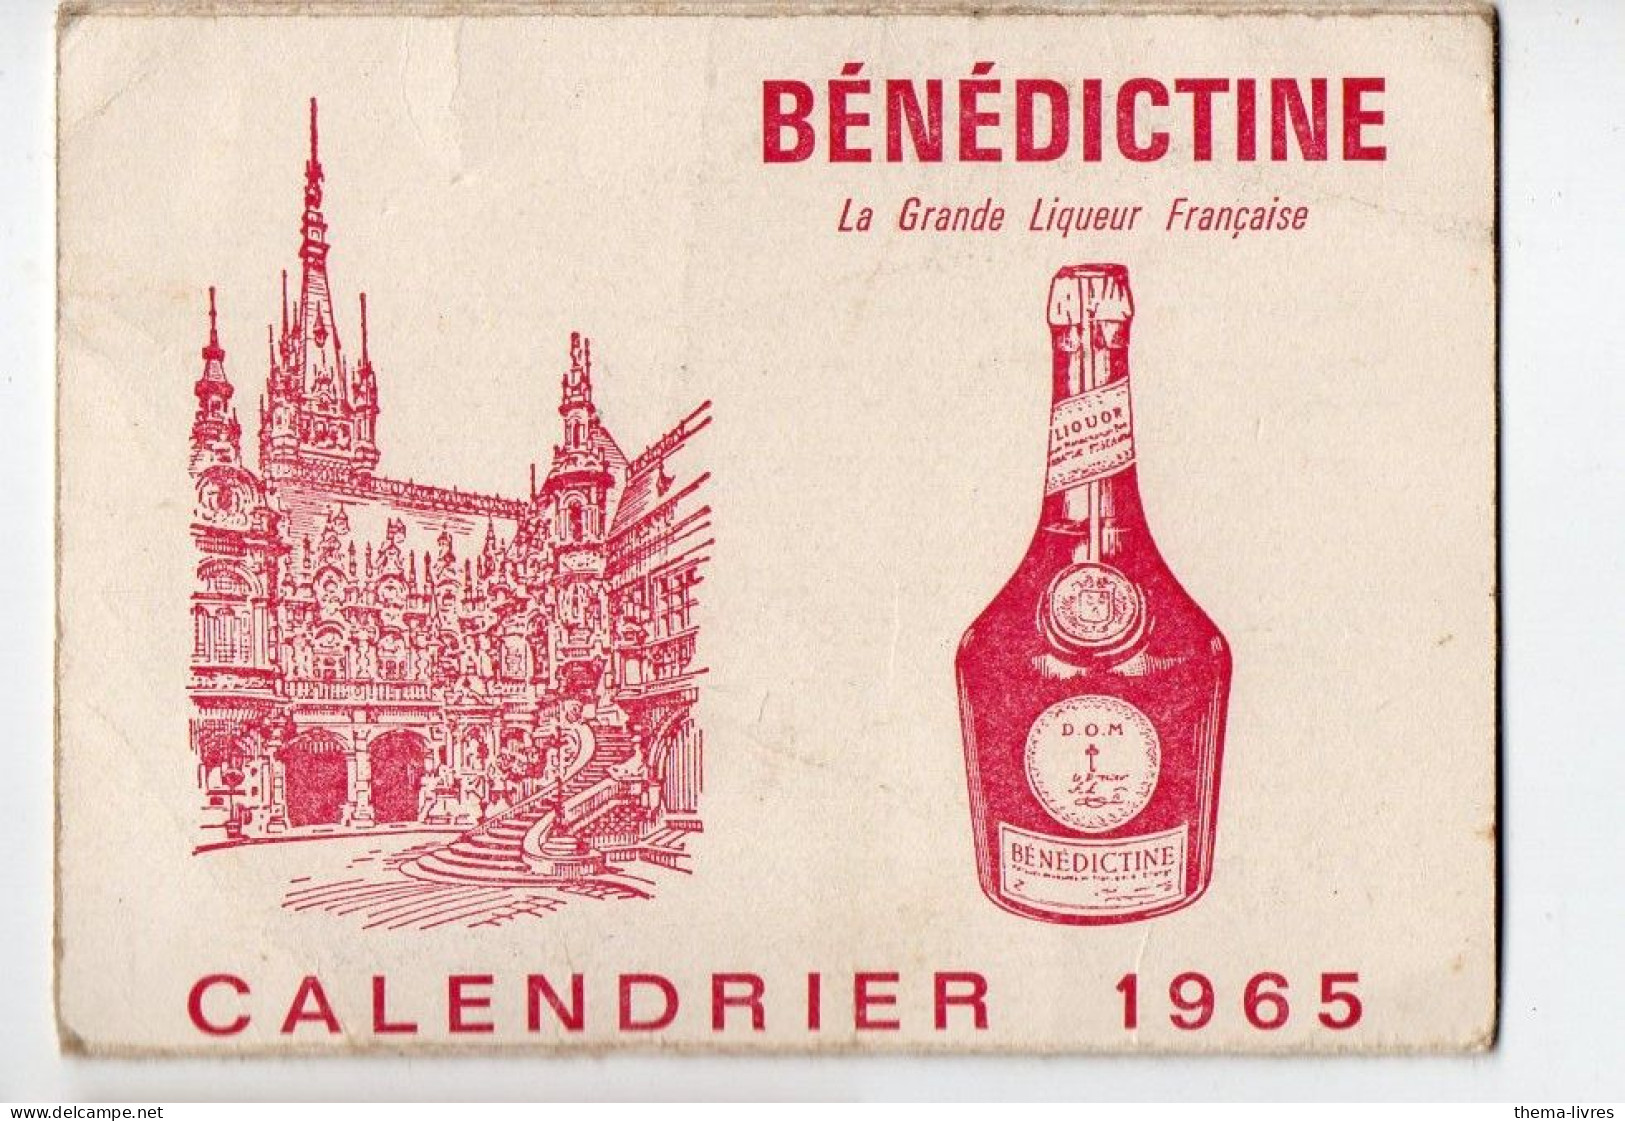 Calendrier Dépliant  BENEDICTINE 1965 (PPP46204) - Small : 1961-70